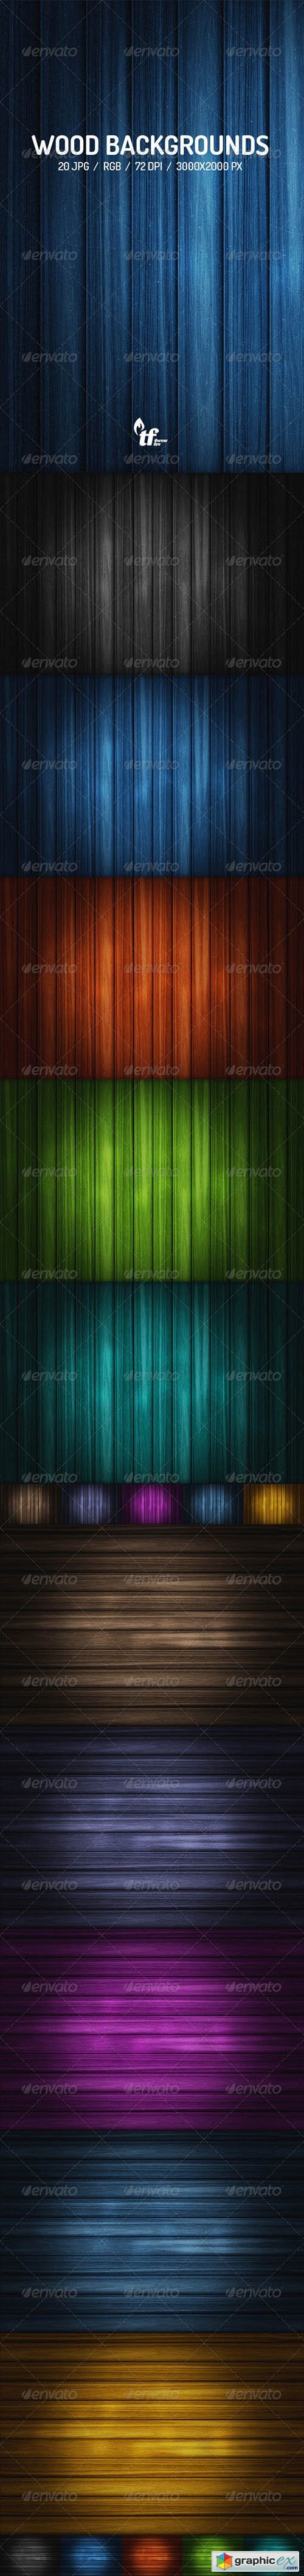 20 Wood Backgrounds